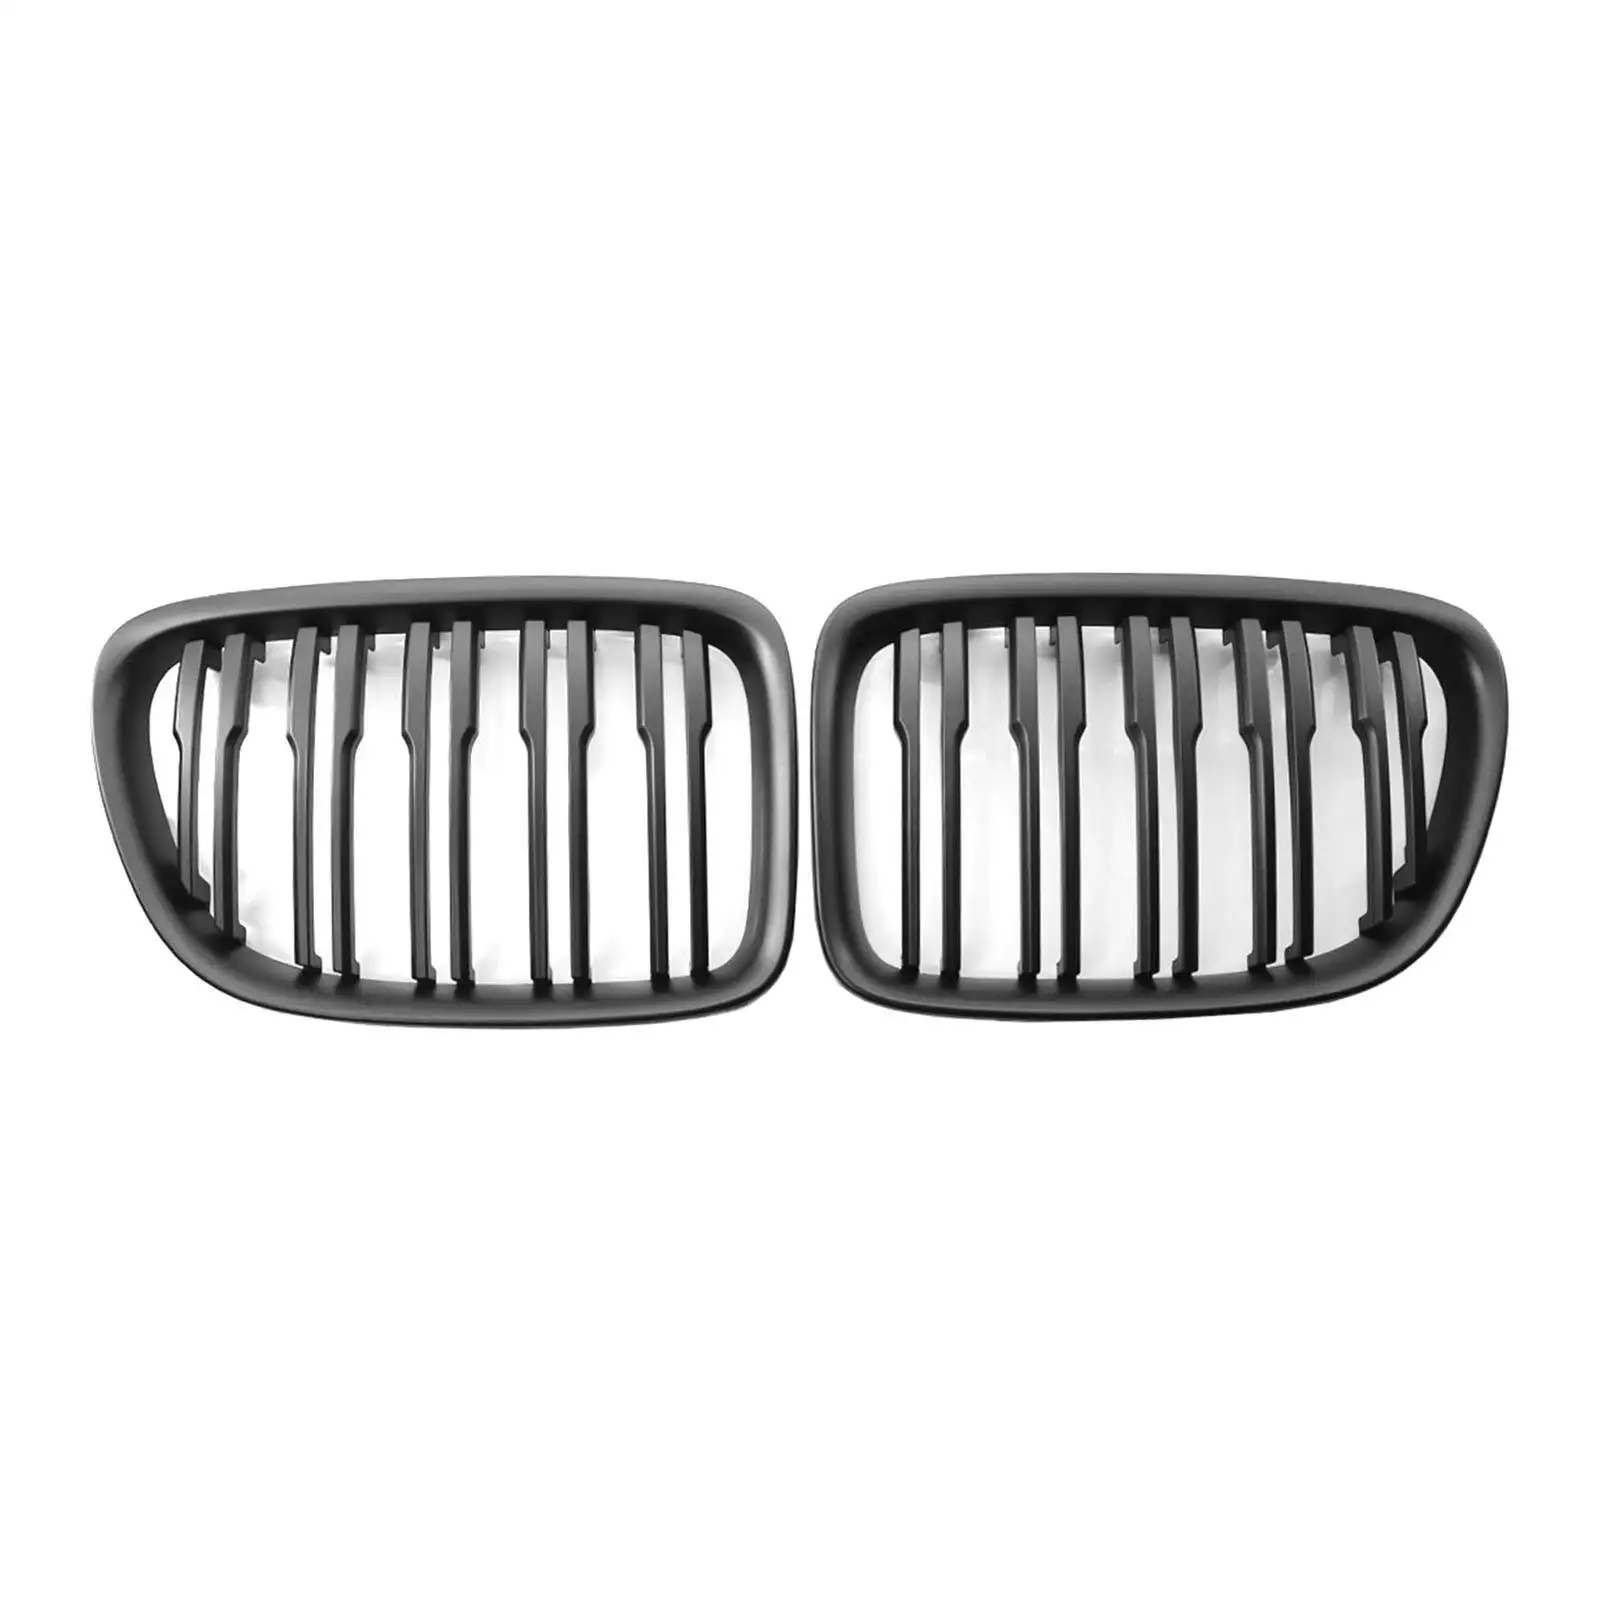 2x Grille Front Compatible for  E84 X1 20i 25i 28i 2009 2011 2010 2013 2014 Double Slat Bumper Racing Grill Matte Black